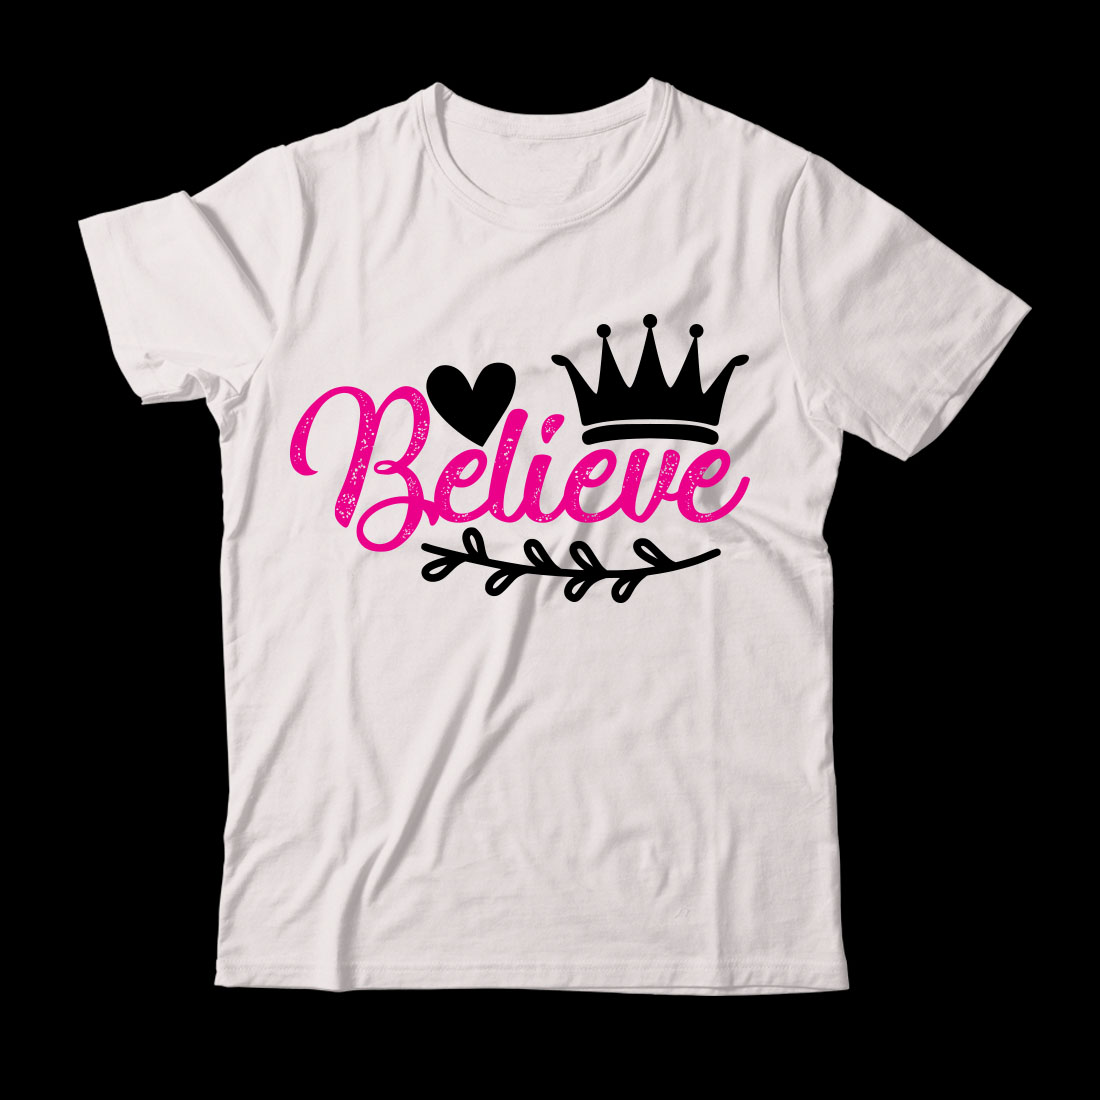 T - shirt that says believe with a crown on it.